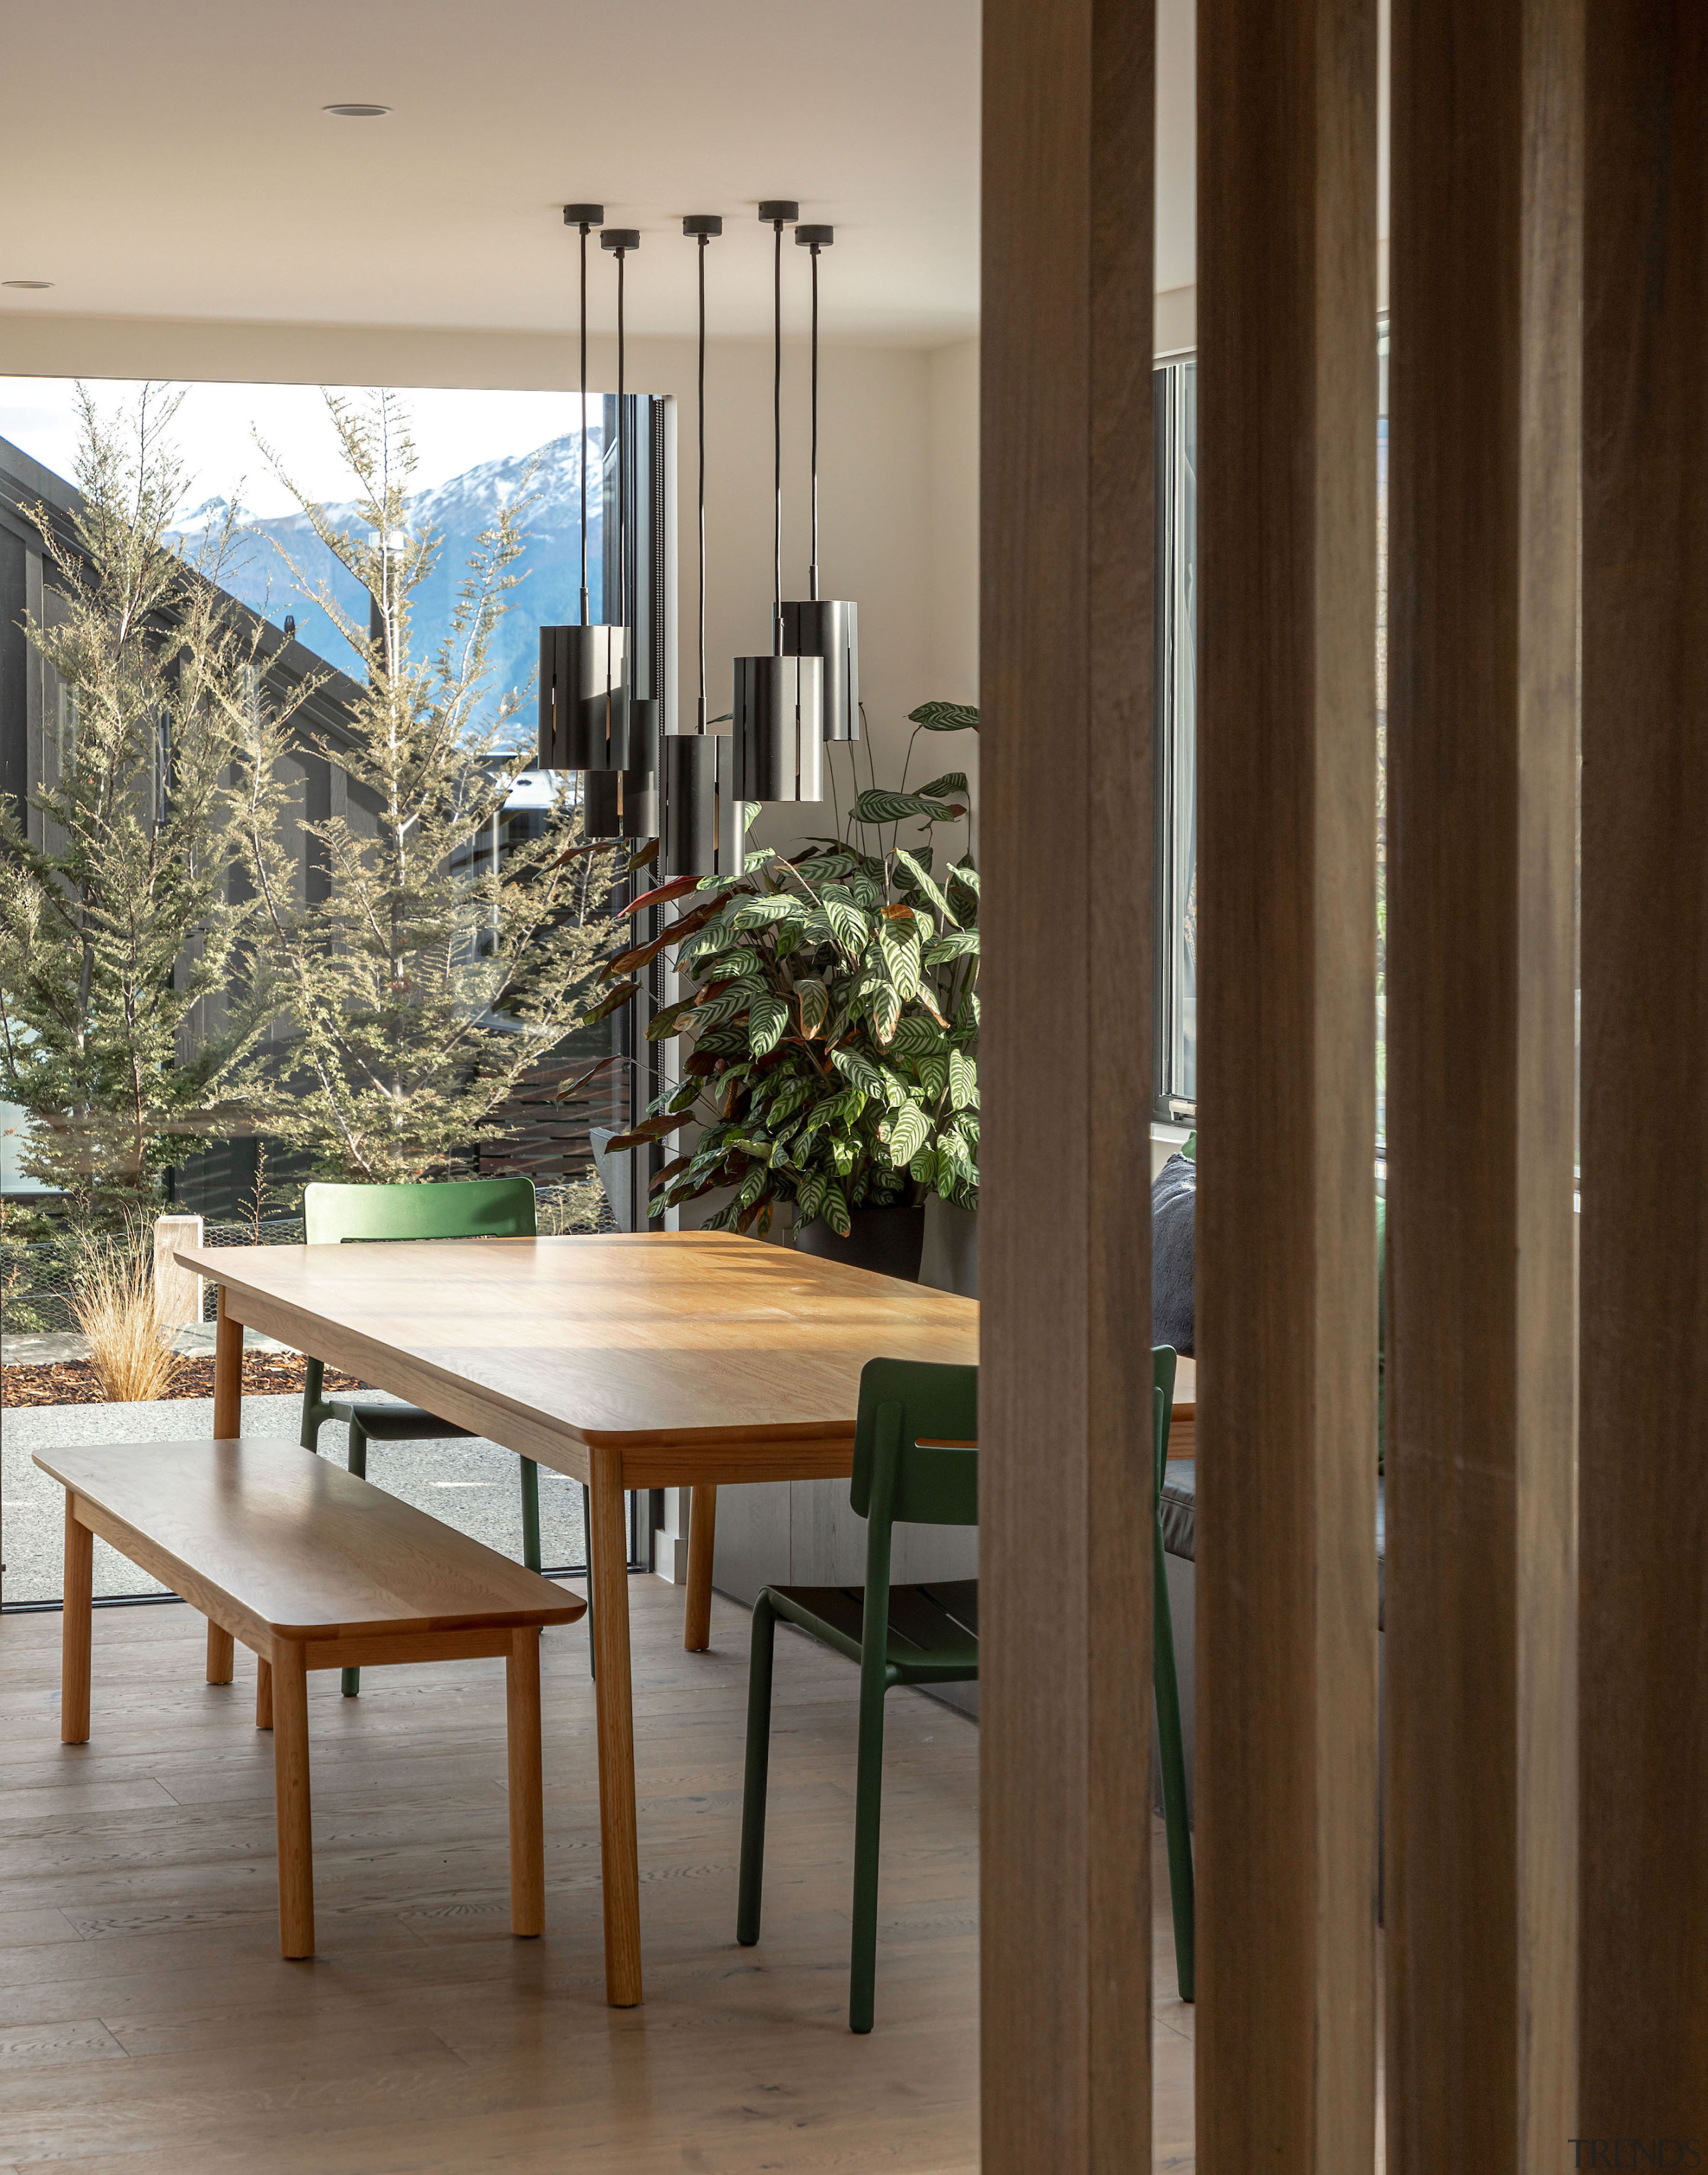 Dining space with mountains. - Drawing on nature 